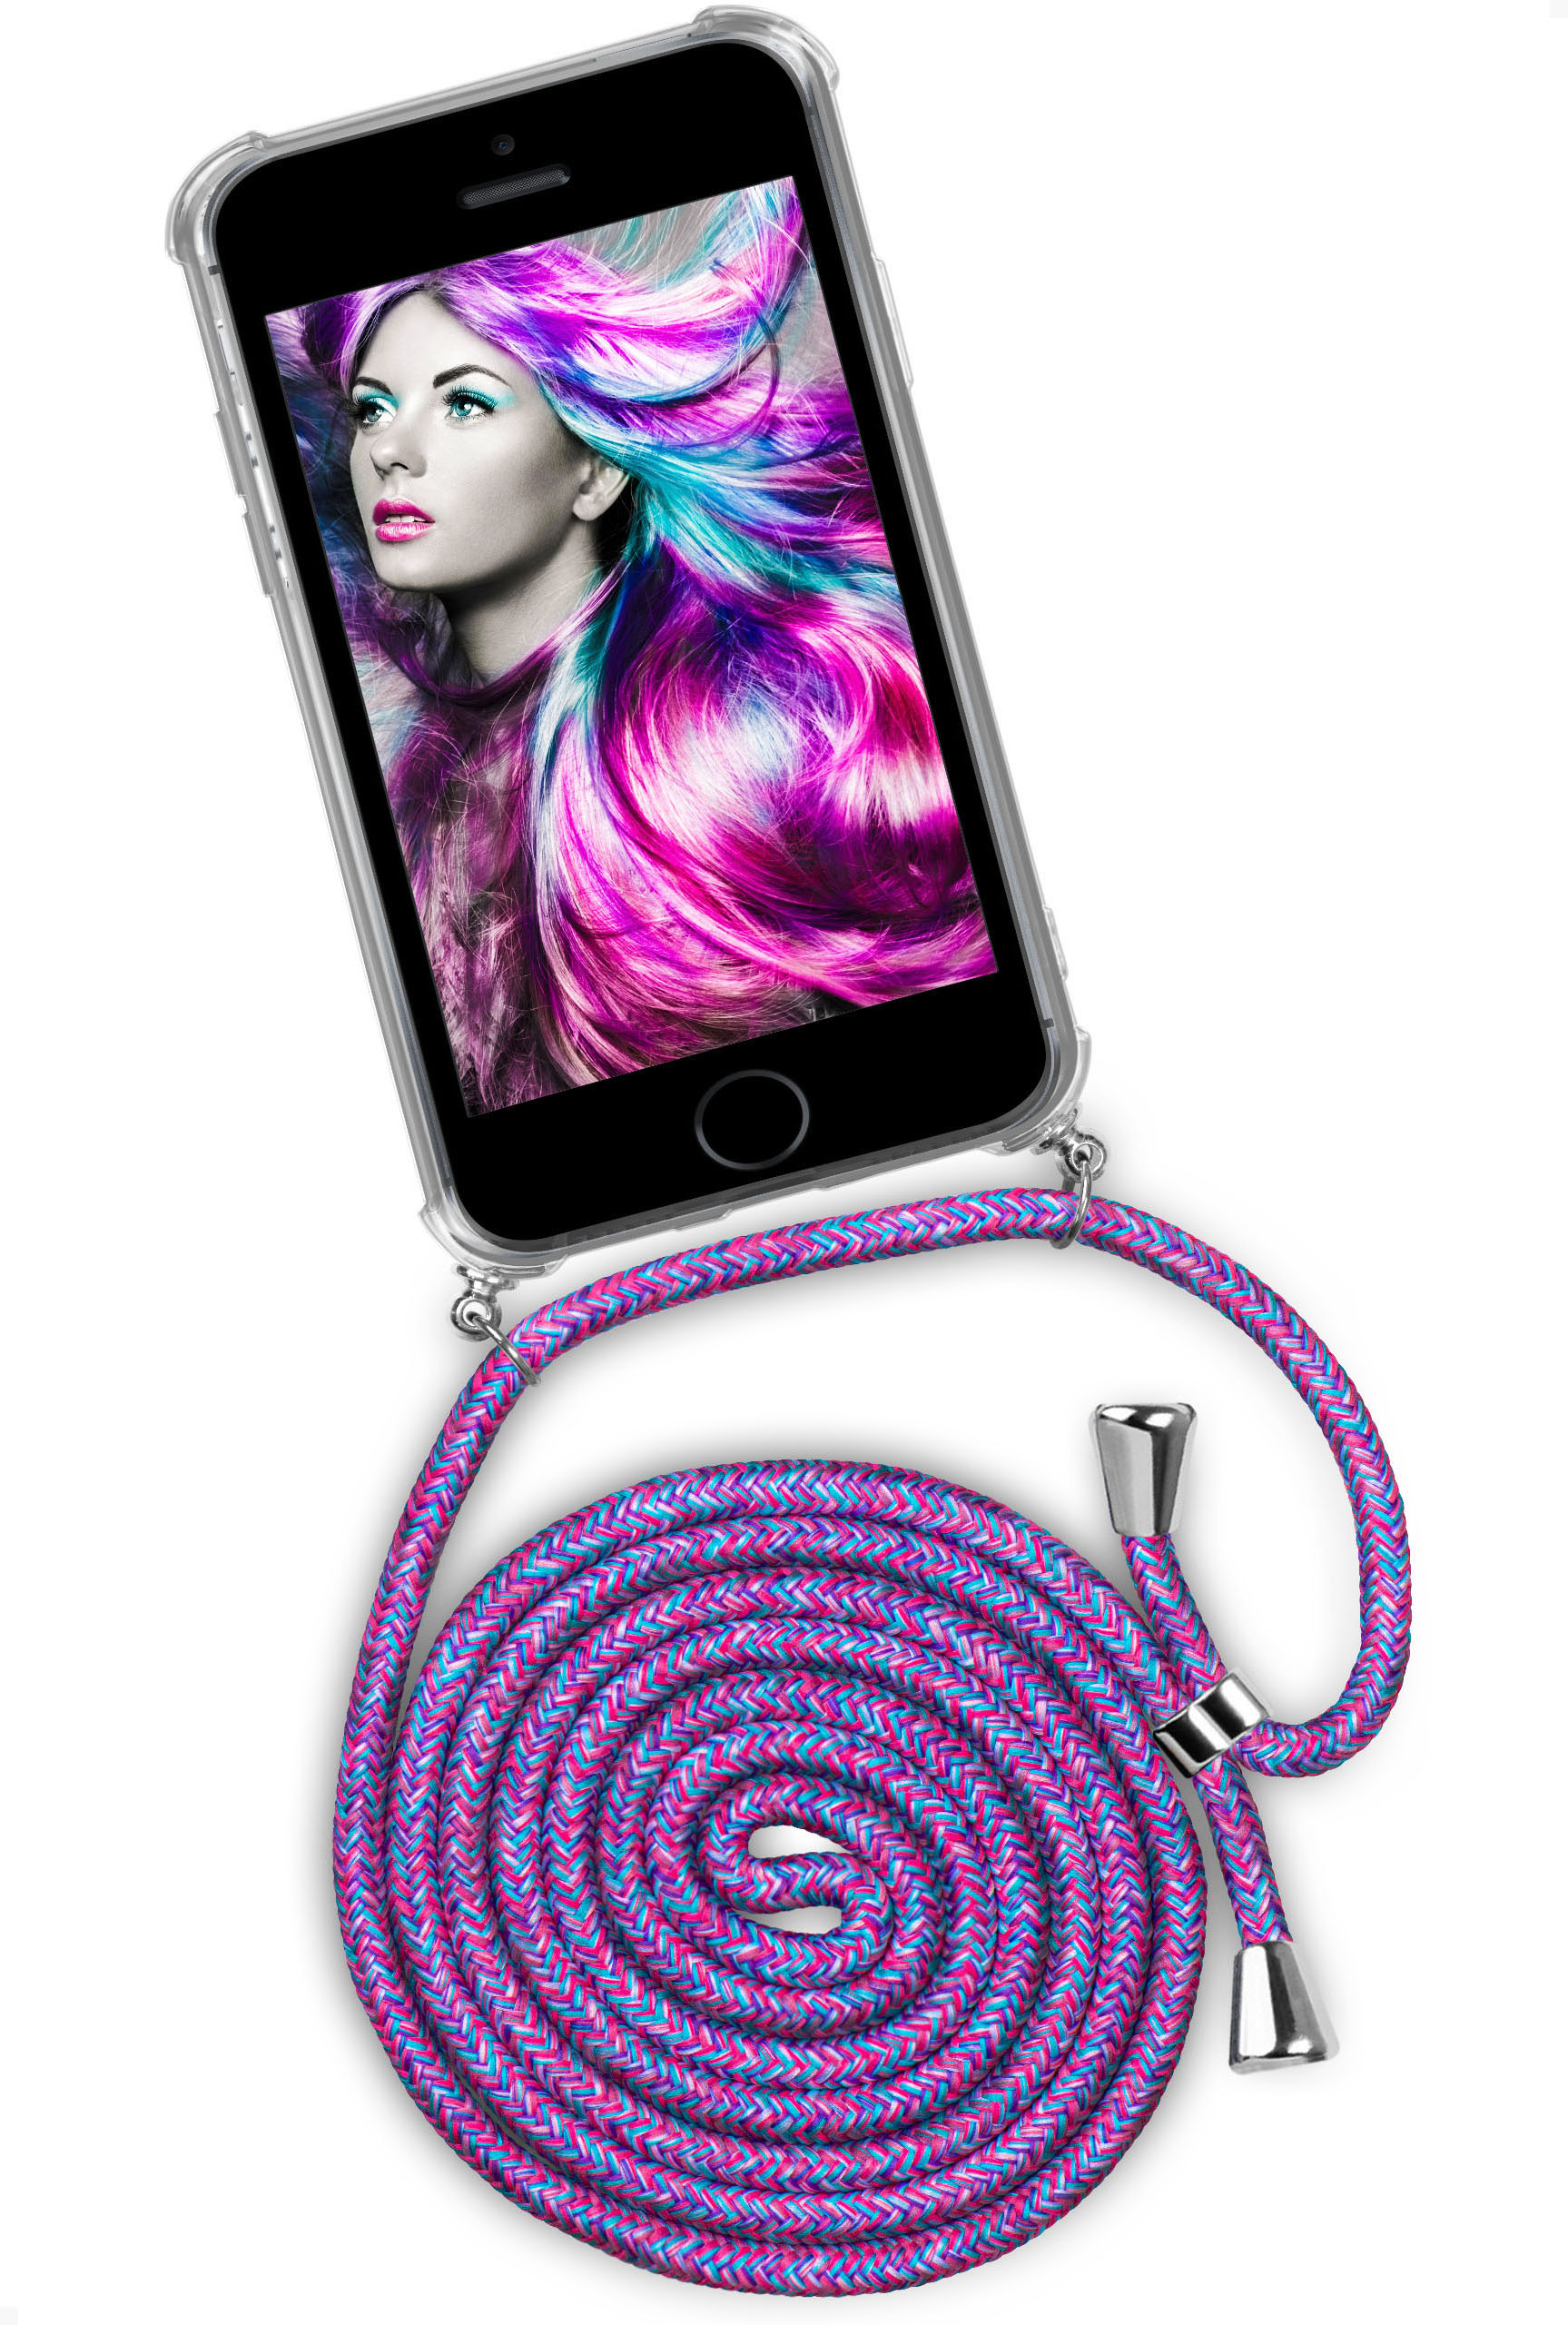 ONEFLOW Twist Apple, SE / (2016), iPhone (Silber) Crazy 5 Unicorn / 5s Case, Backcover